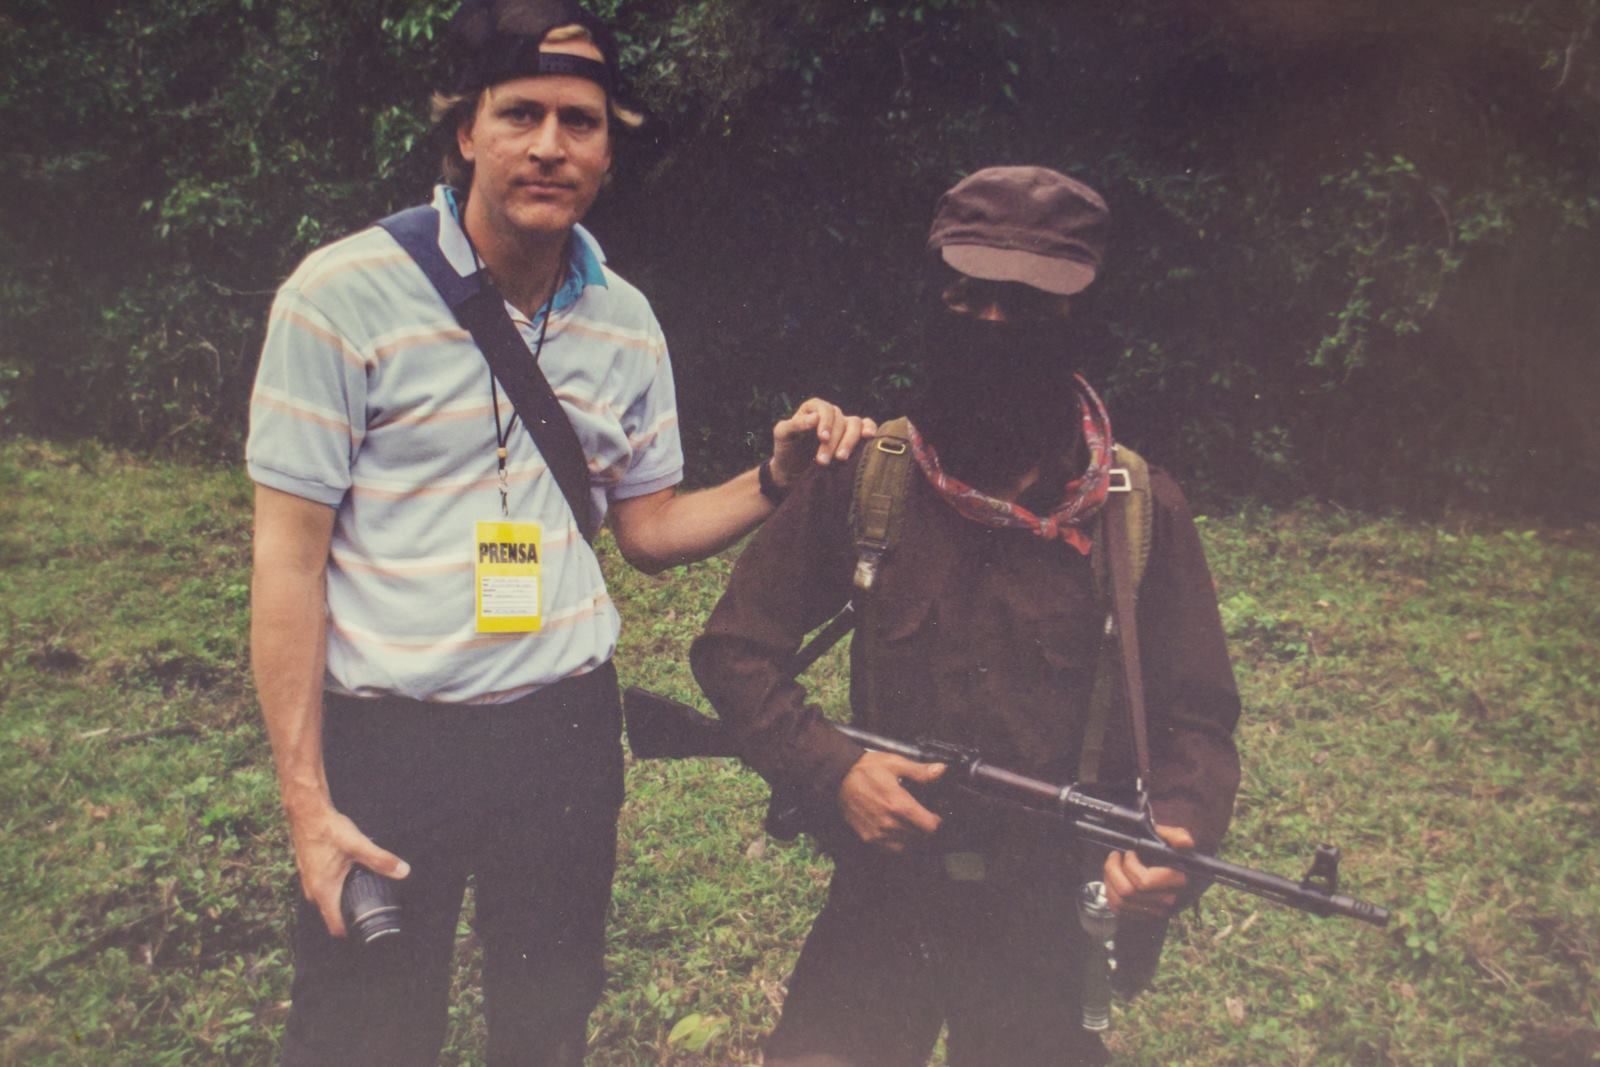 Pulitzer Center grantee and former correspondent for the Dallas Morning News, Tracey Eaton reported on the Zapatistas in 1994 when they waged a short-lived war with the Mexican government before their turn to non-violence. Here he can be seen with an armed member of the Zapatista Army of National Liberation (EZLN) at the time of their rebellion. Image courtesy of Tracey Eaton.